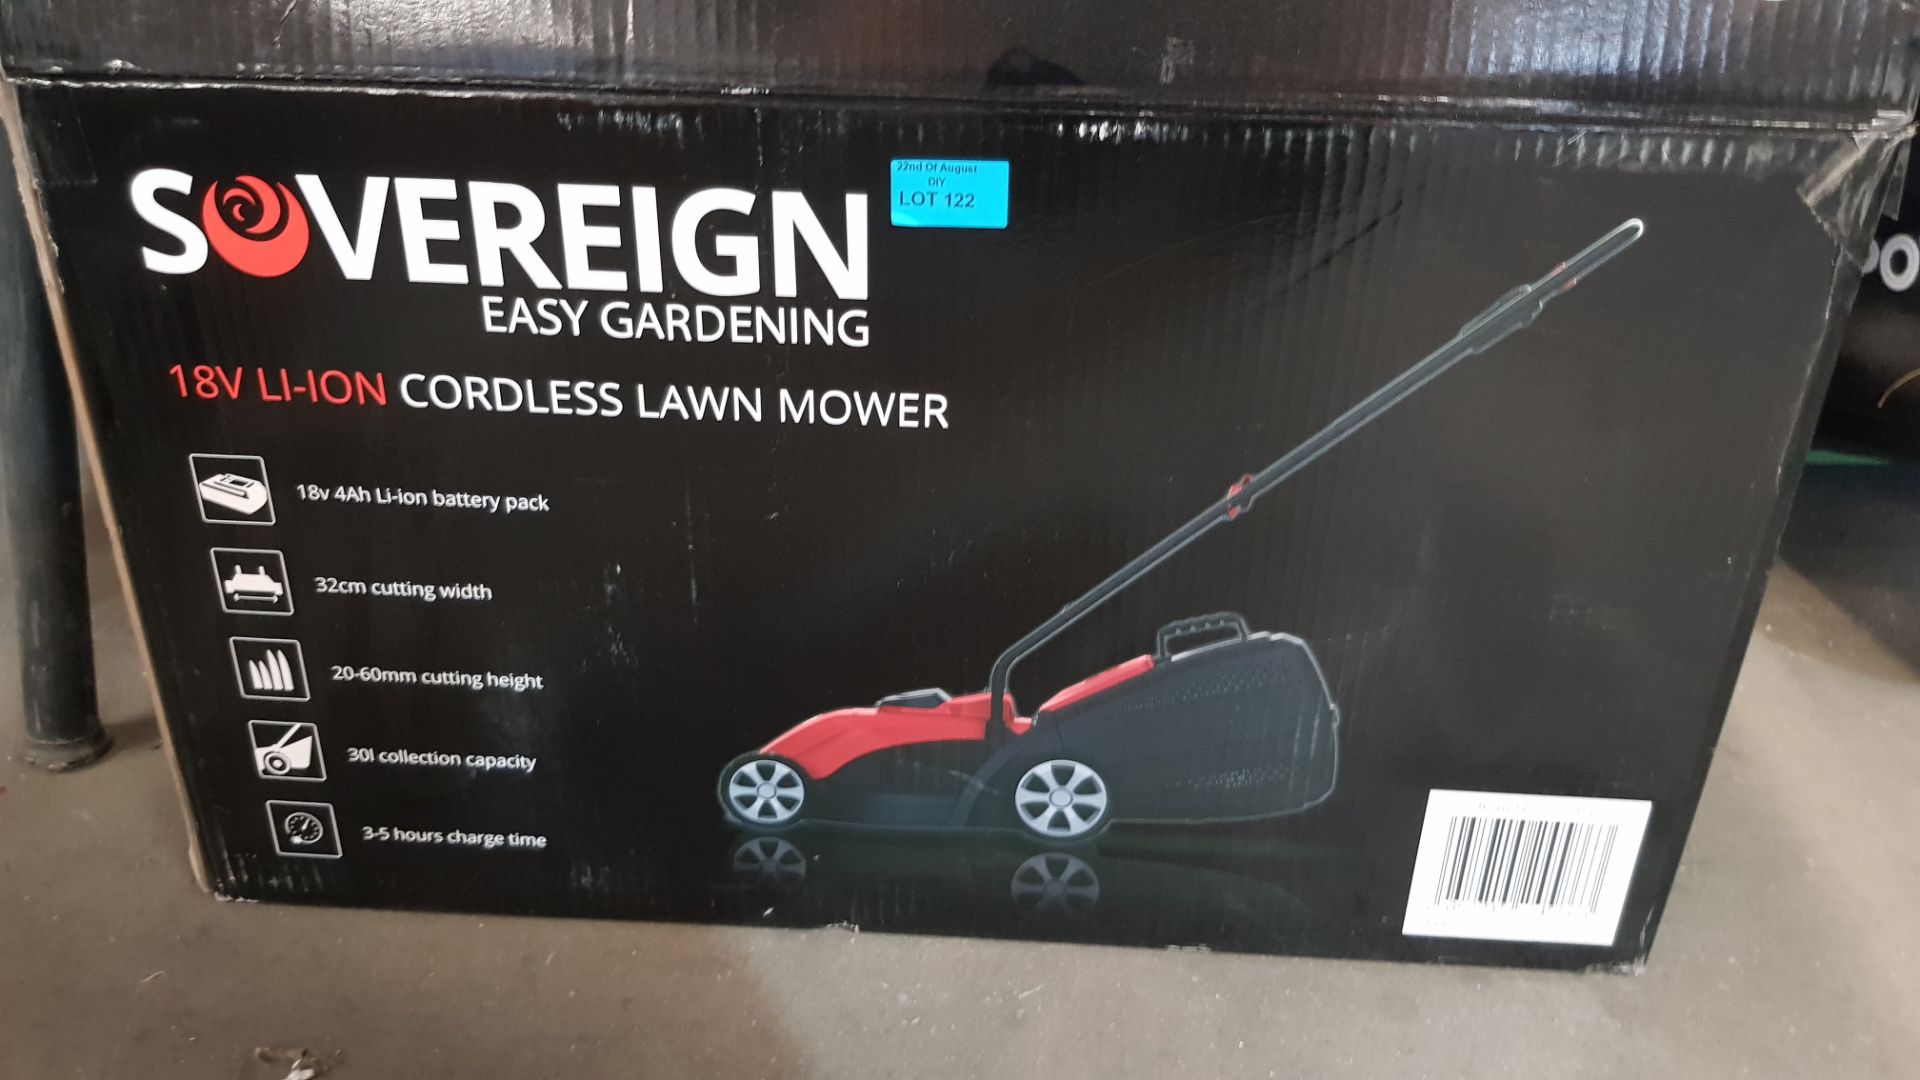 (R11A) 1x Sovereign 18V Cordless Lawn Mower (With Battery & Charger). RRP £89. - Image 2 of 2